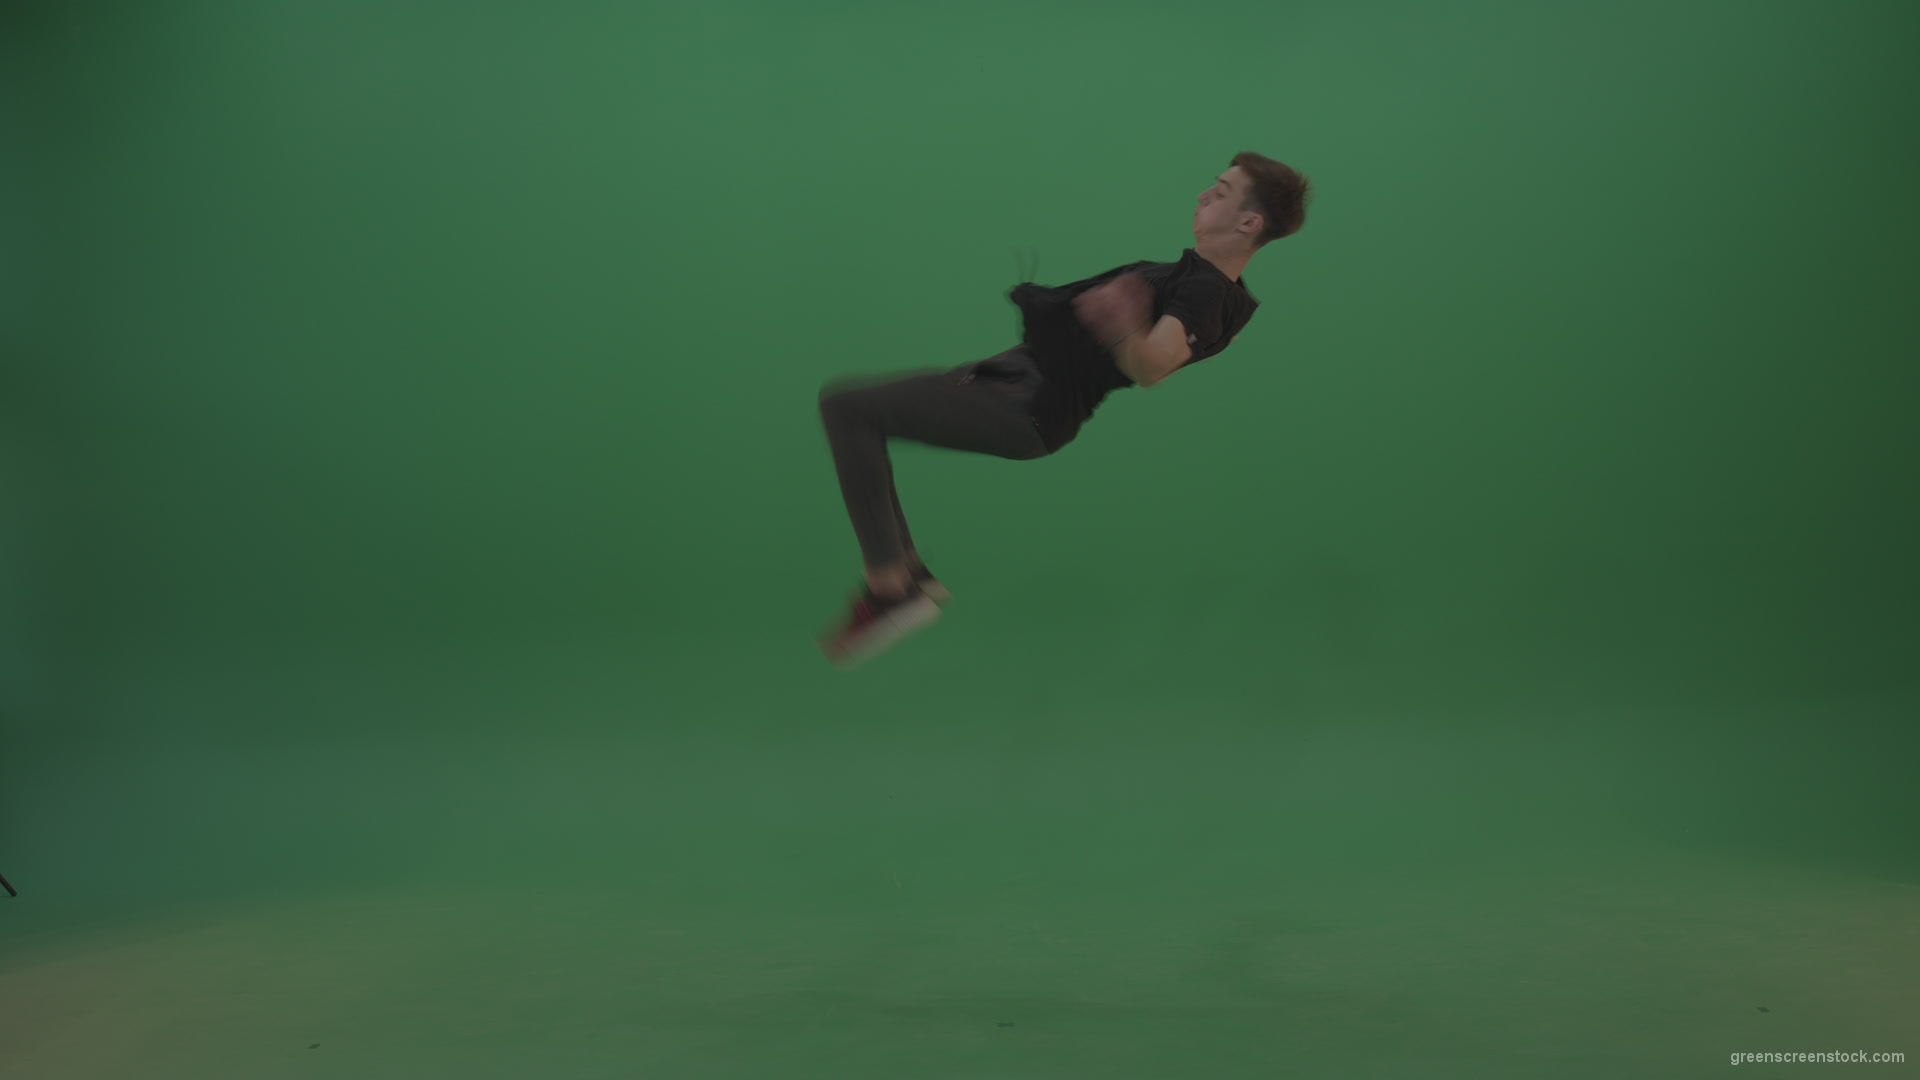 Young_Sporty_Man_Doing_Excellent_Awesome_Back_Flip_On_Green_Screen_Wall_Background_006 Green Screen Stock